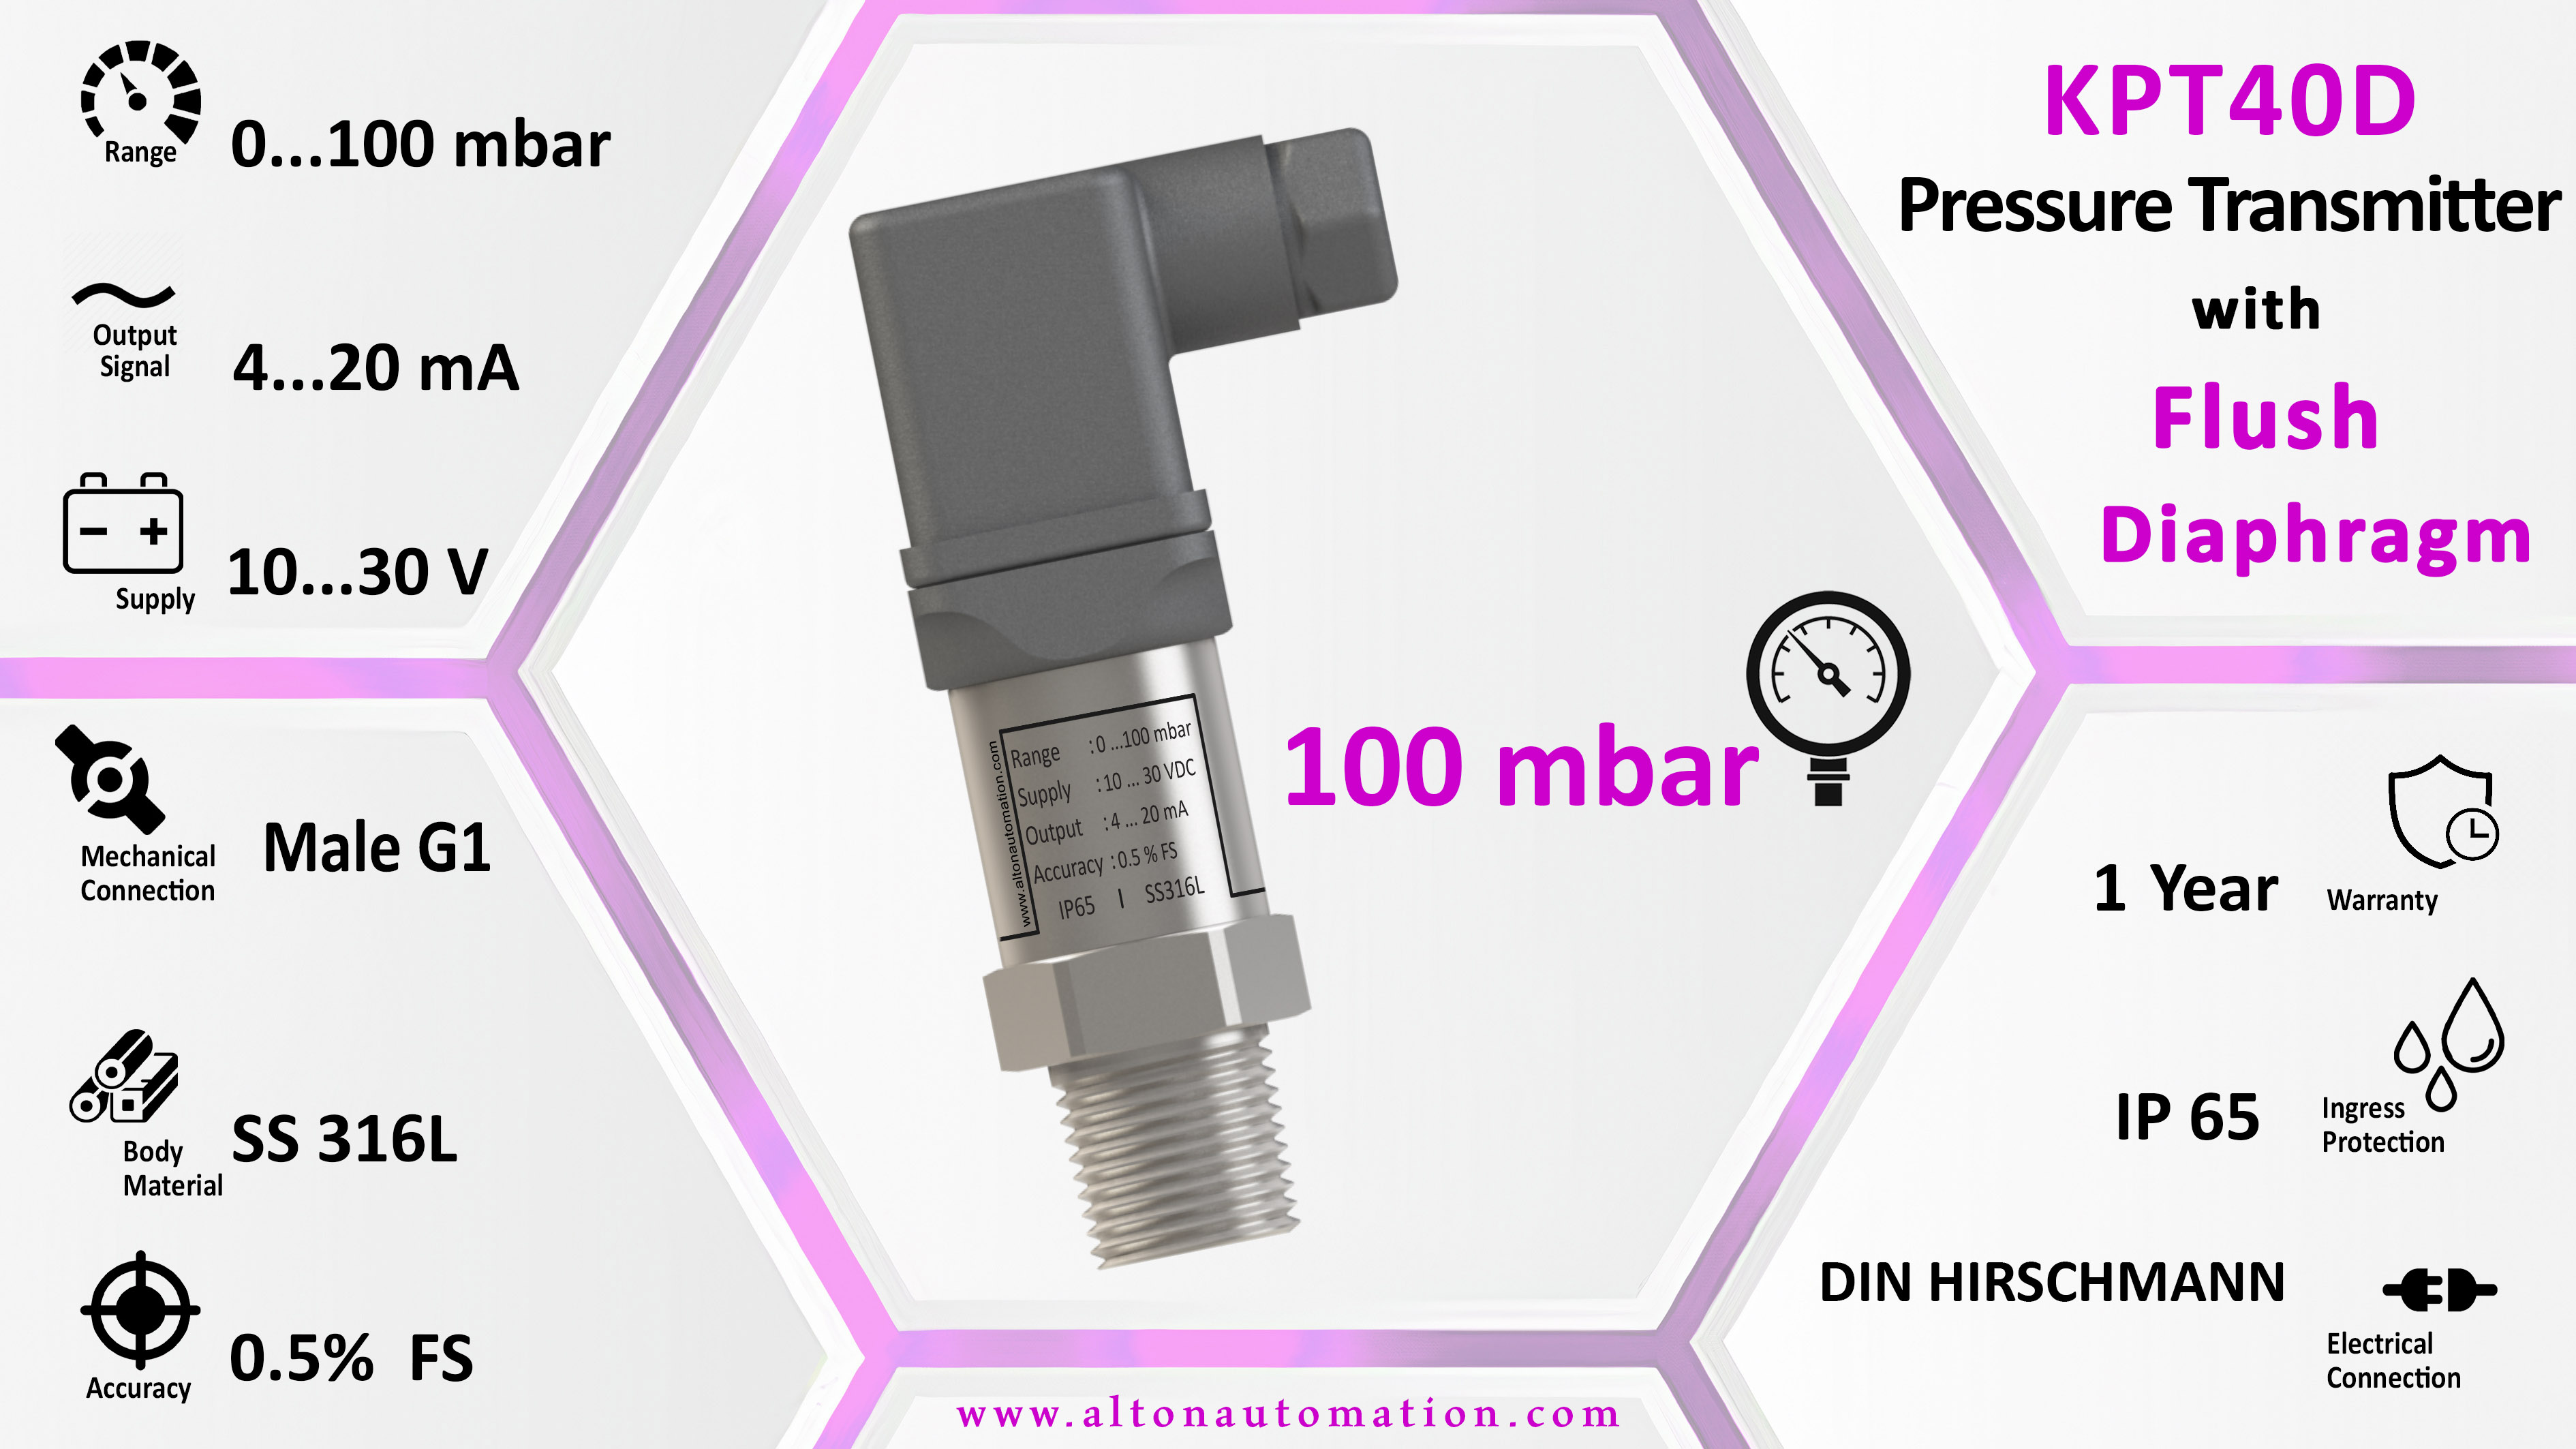 Flush Diaphragm Pressure Transmitters with cooling_KPT40D-.10-C1-MG1_image_2